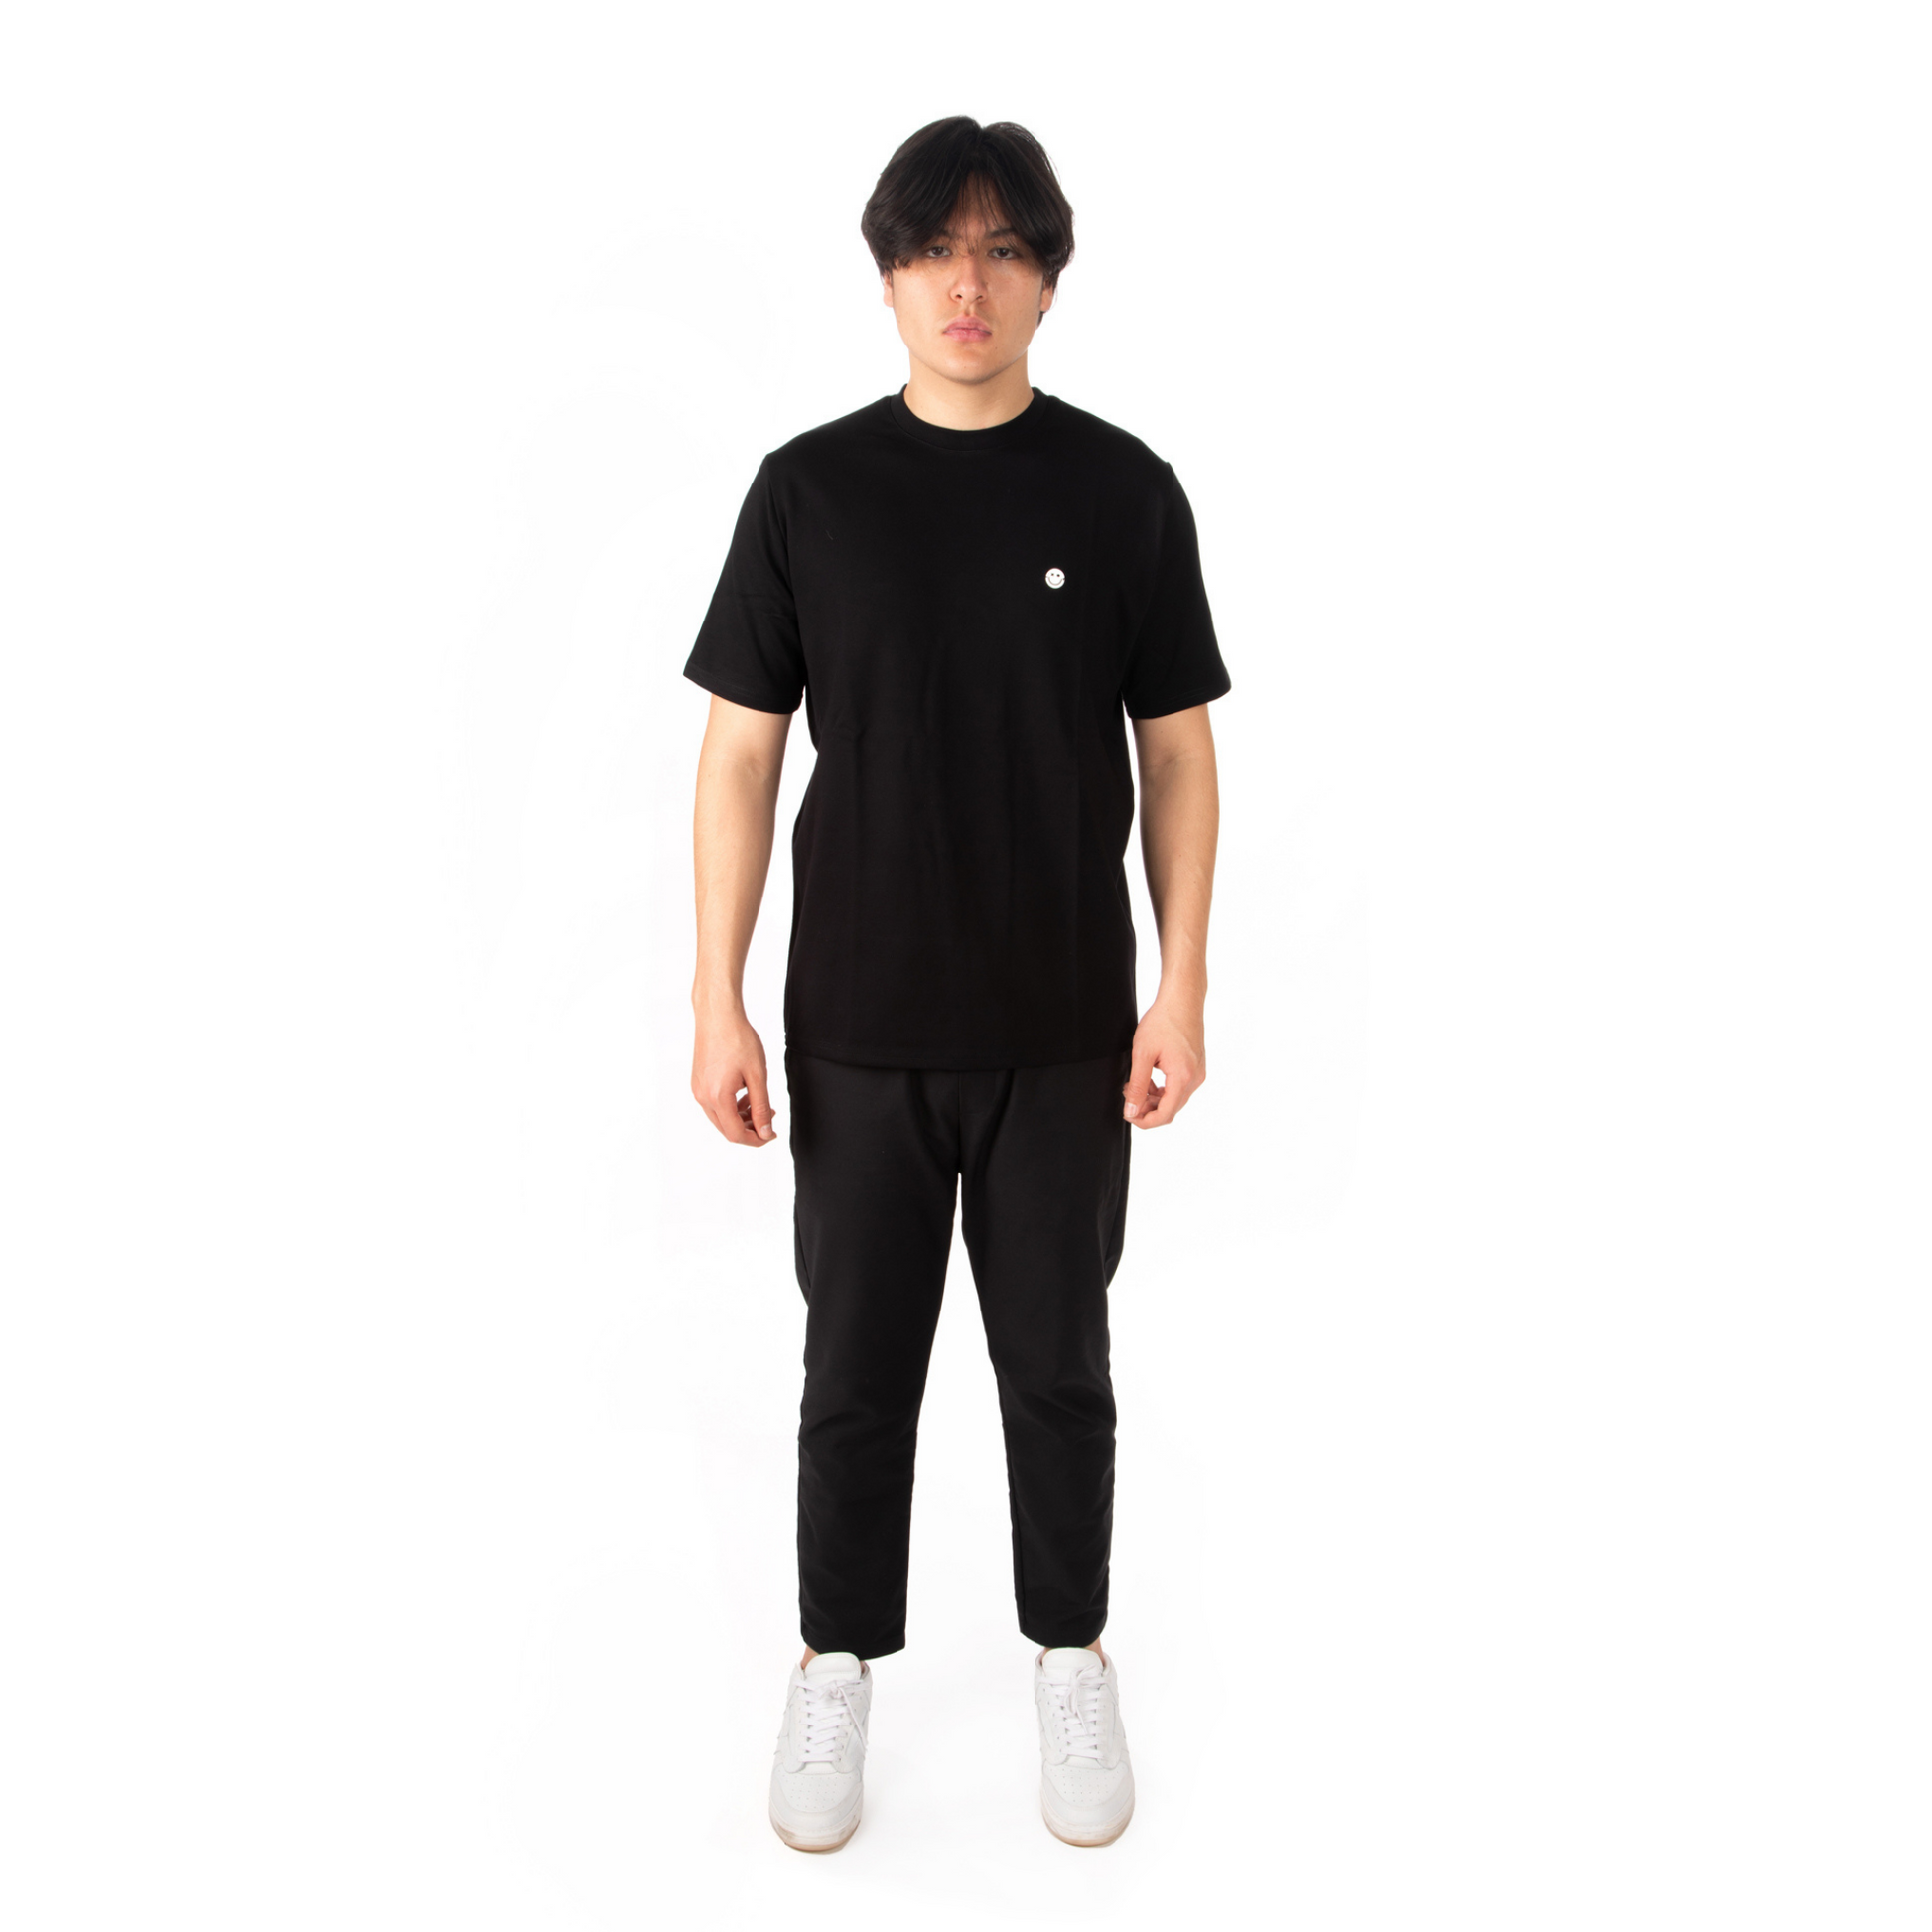 L’Homme Moderne Black T-shirt with Stainless Smiley front view on male model